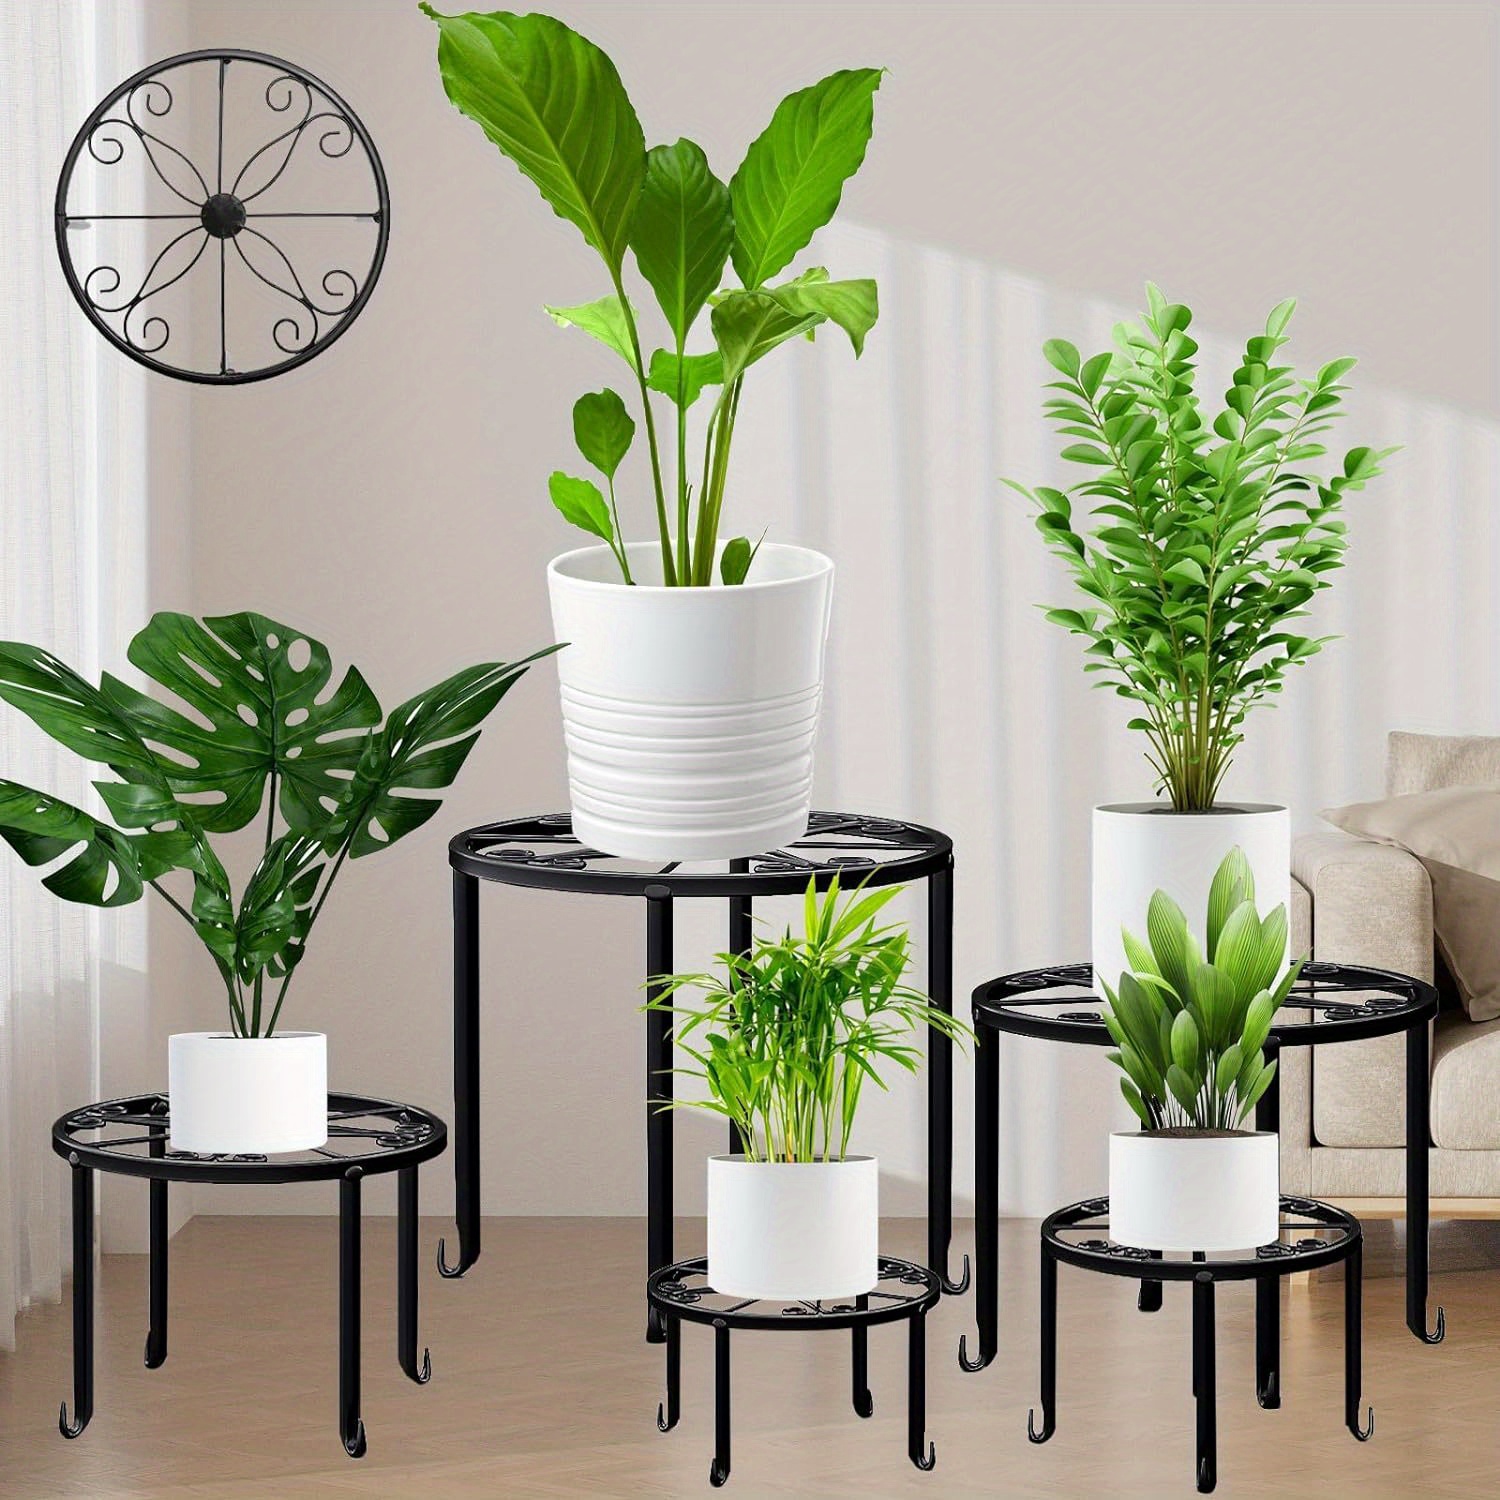 

5-pack Heavy Duty Metal Plant Stands - Rustproof Iron Round Shelves For Indoor & Outdoor Plants, Durable Planter Holders With Curved Legs, Black Metal Plant Hanger Metal Plant Holder For Wall Outdoor